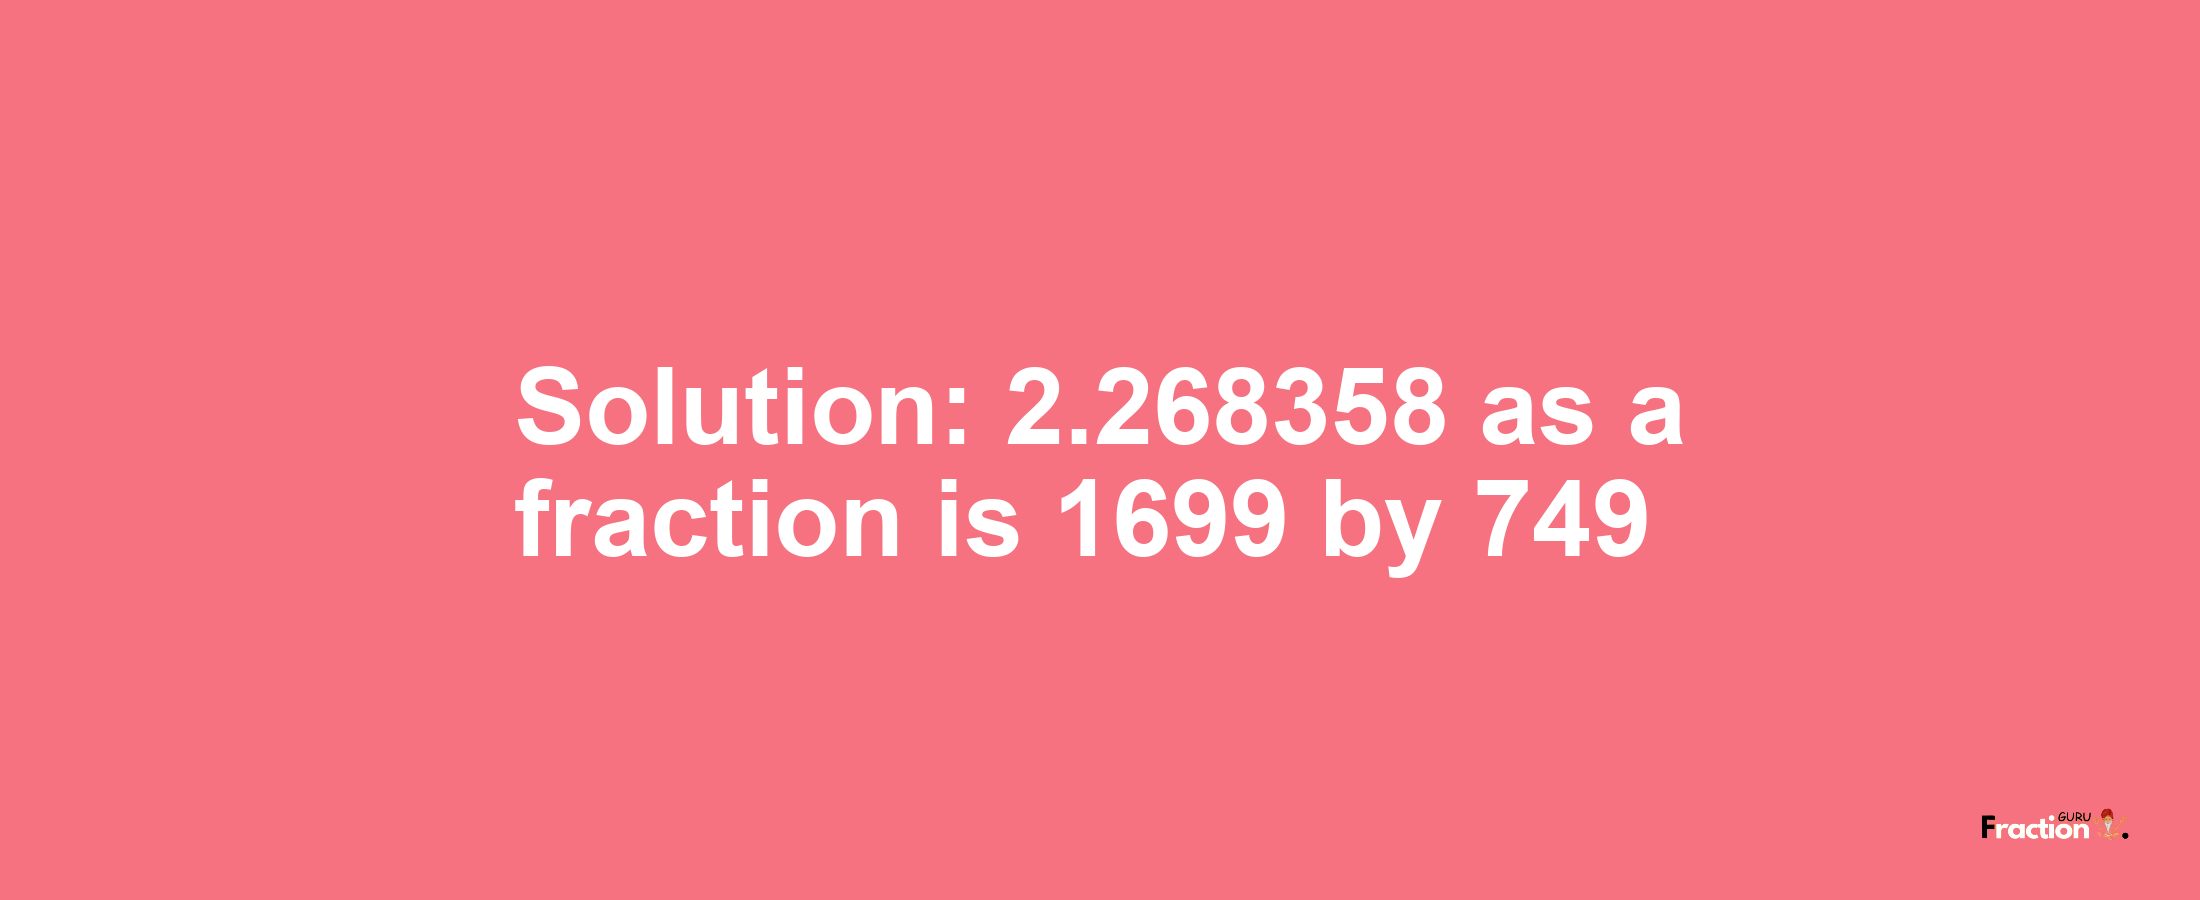 Solution:2.268358 as a fraction is 1699/749